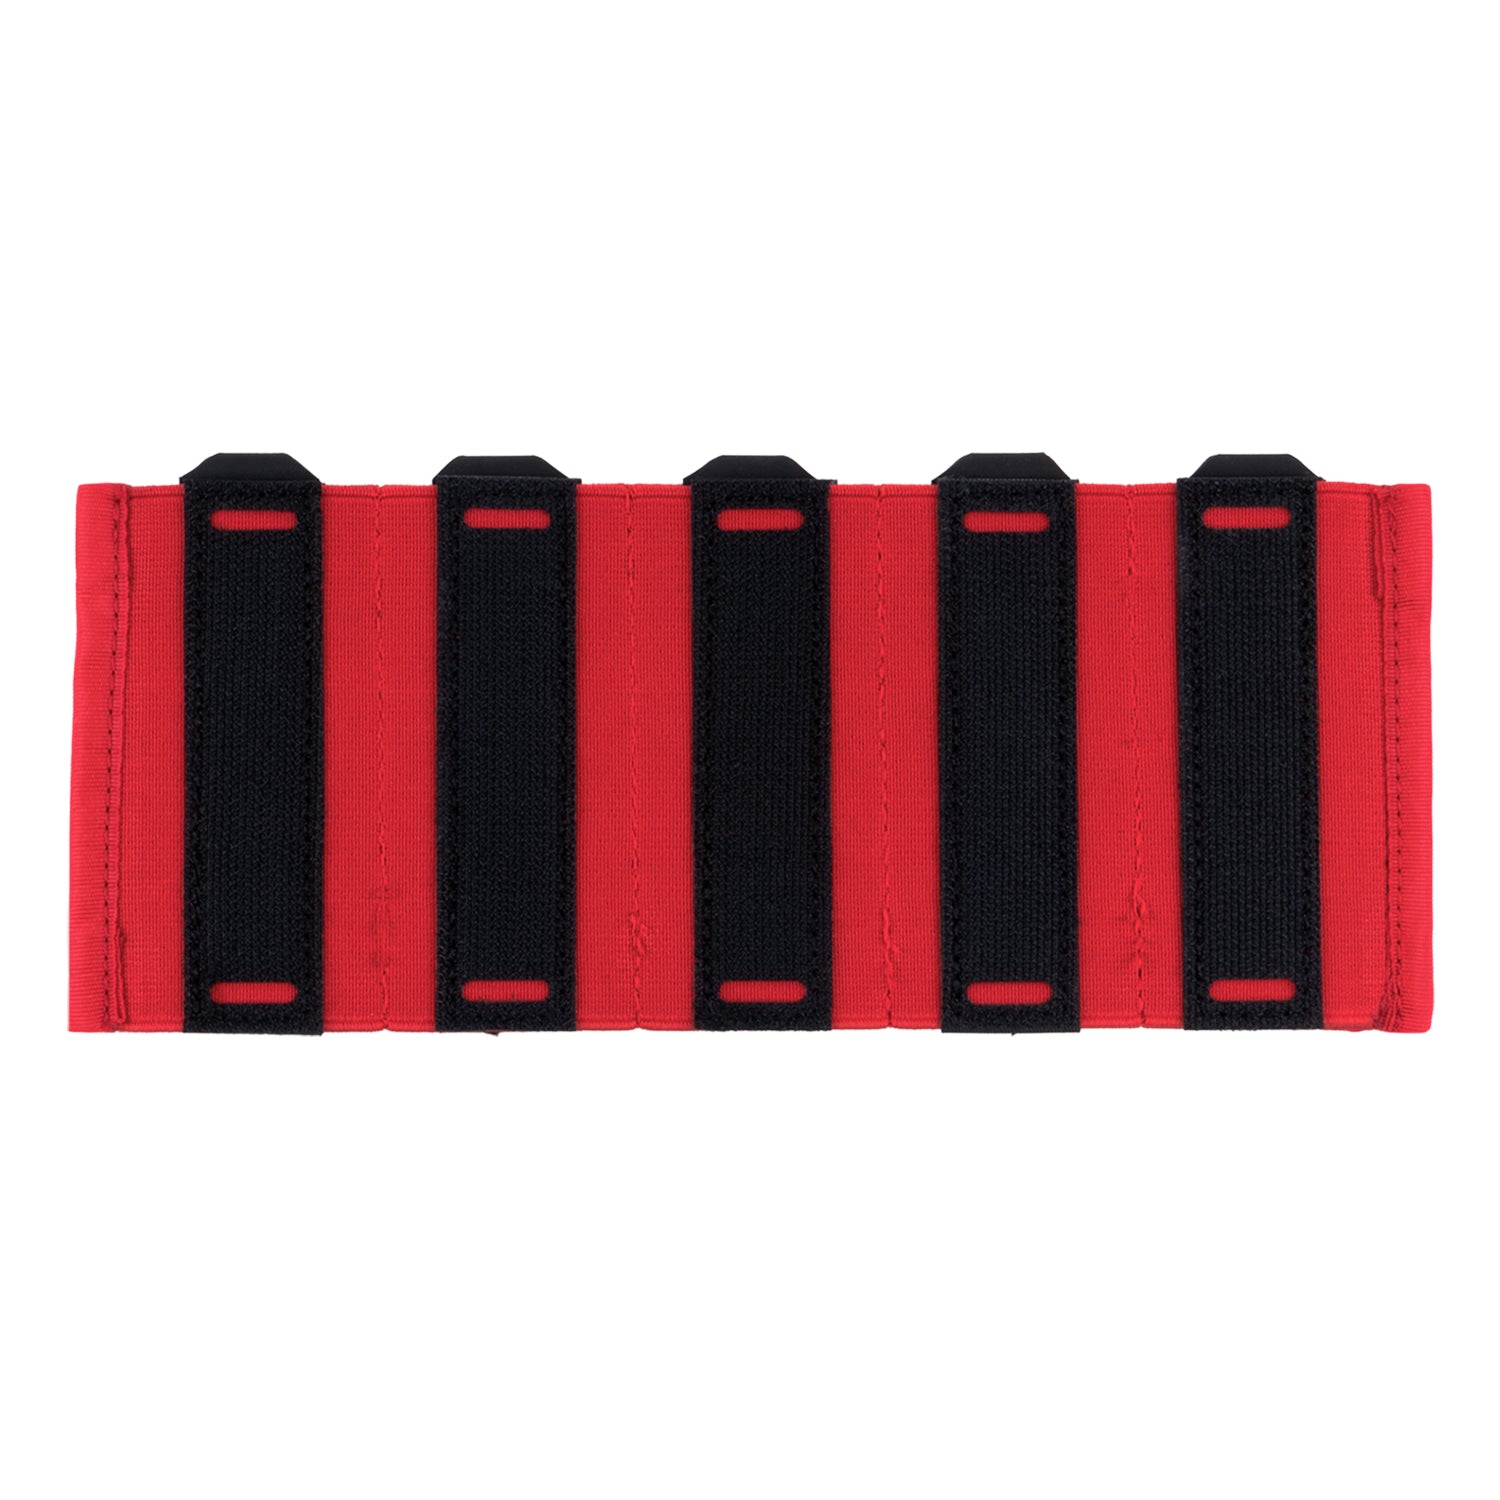 PROTON MAG POUCH INSERT - PISTOL [5 MAG] - RED